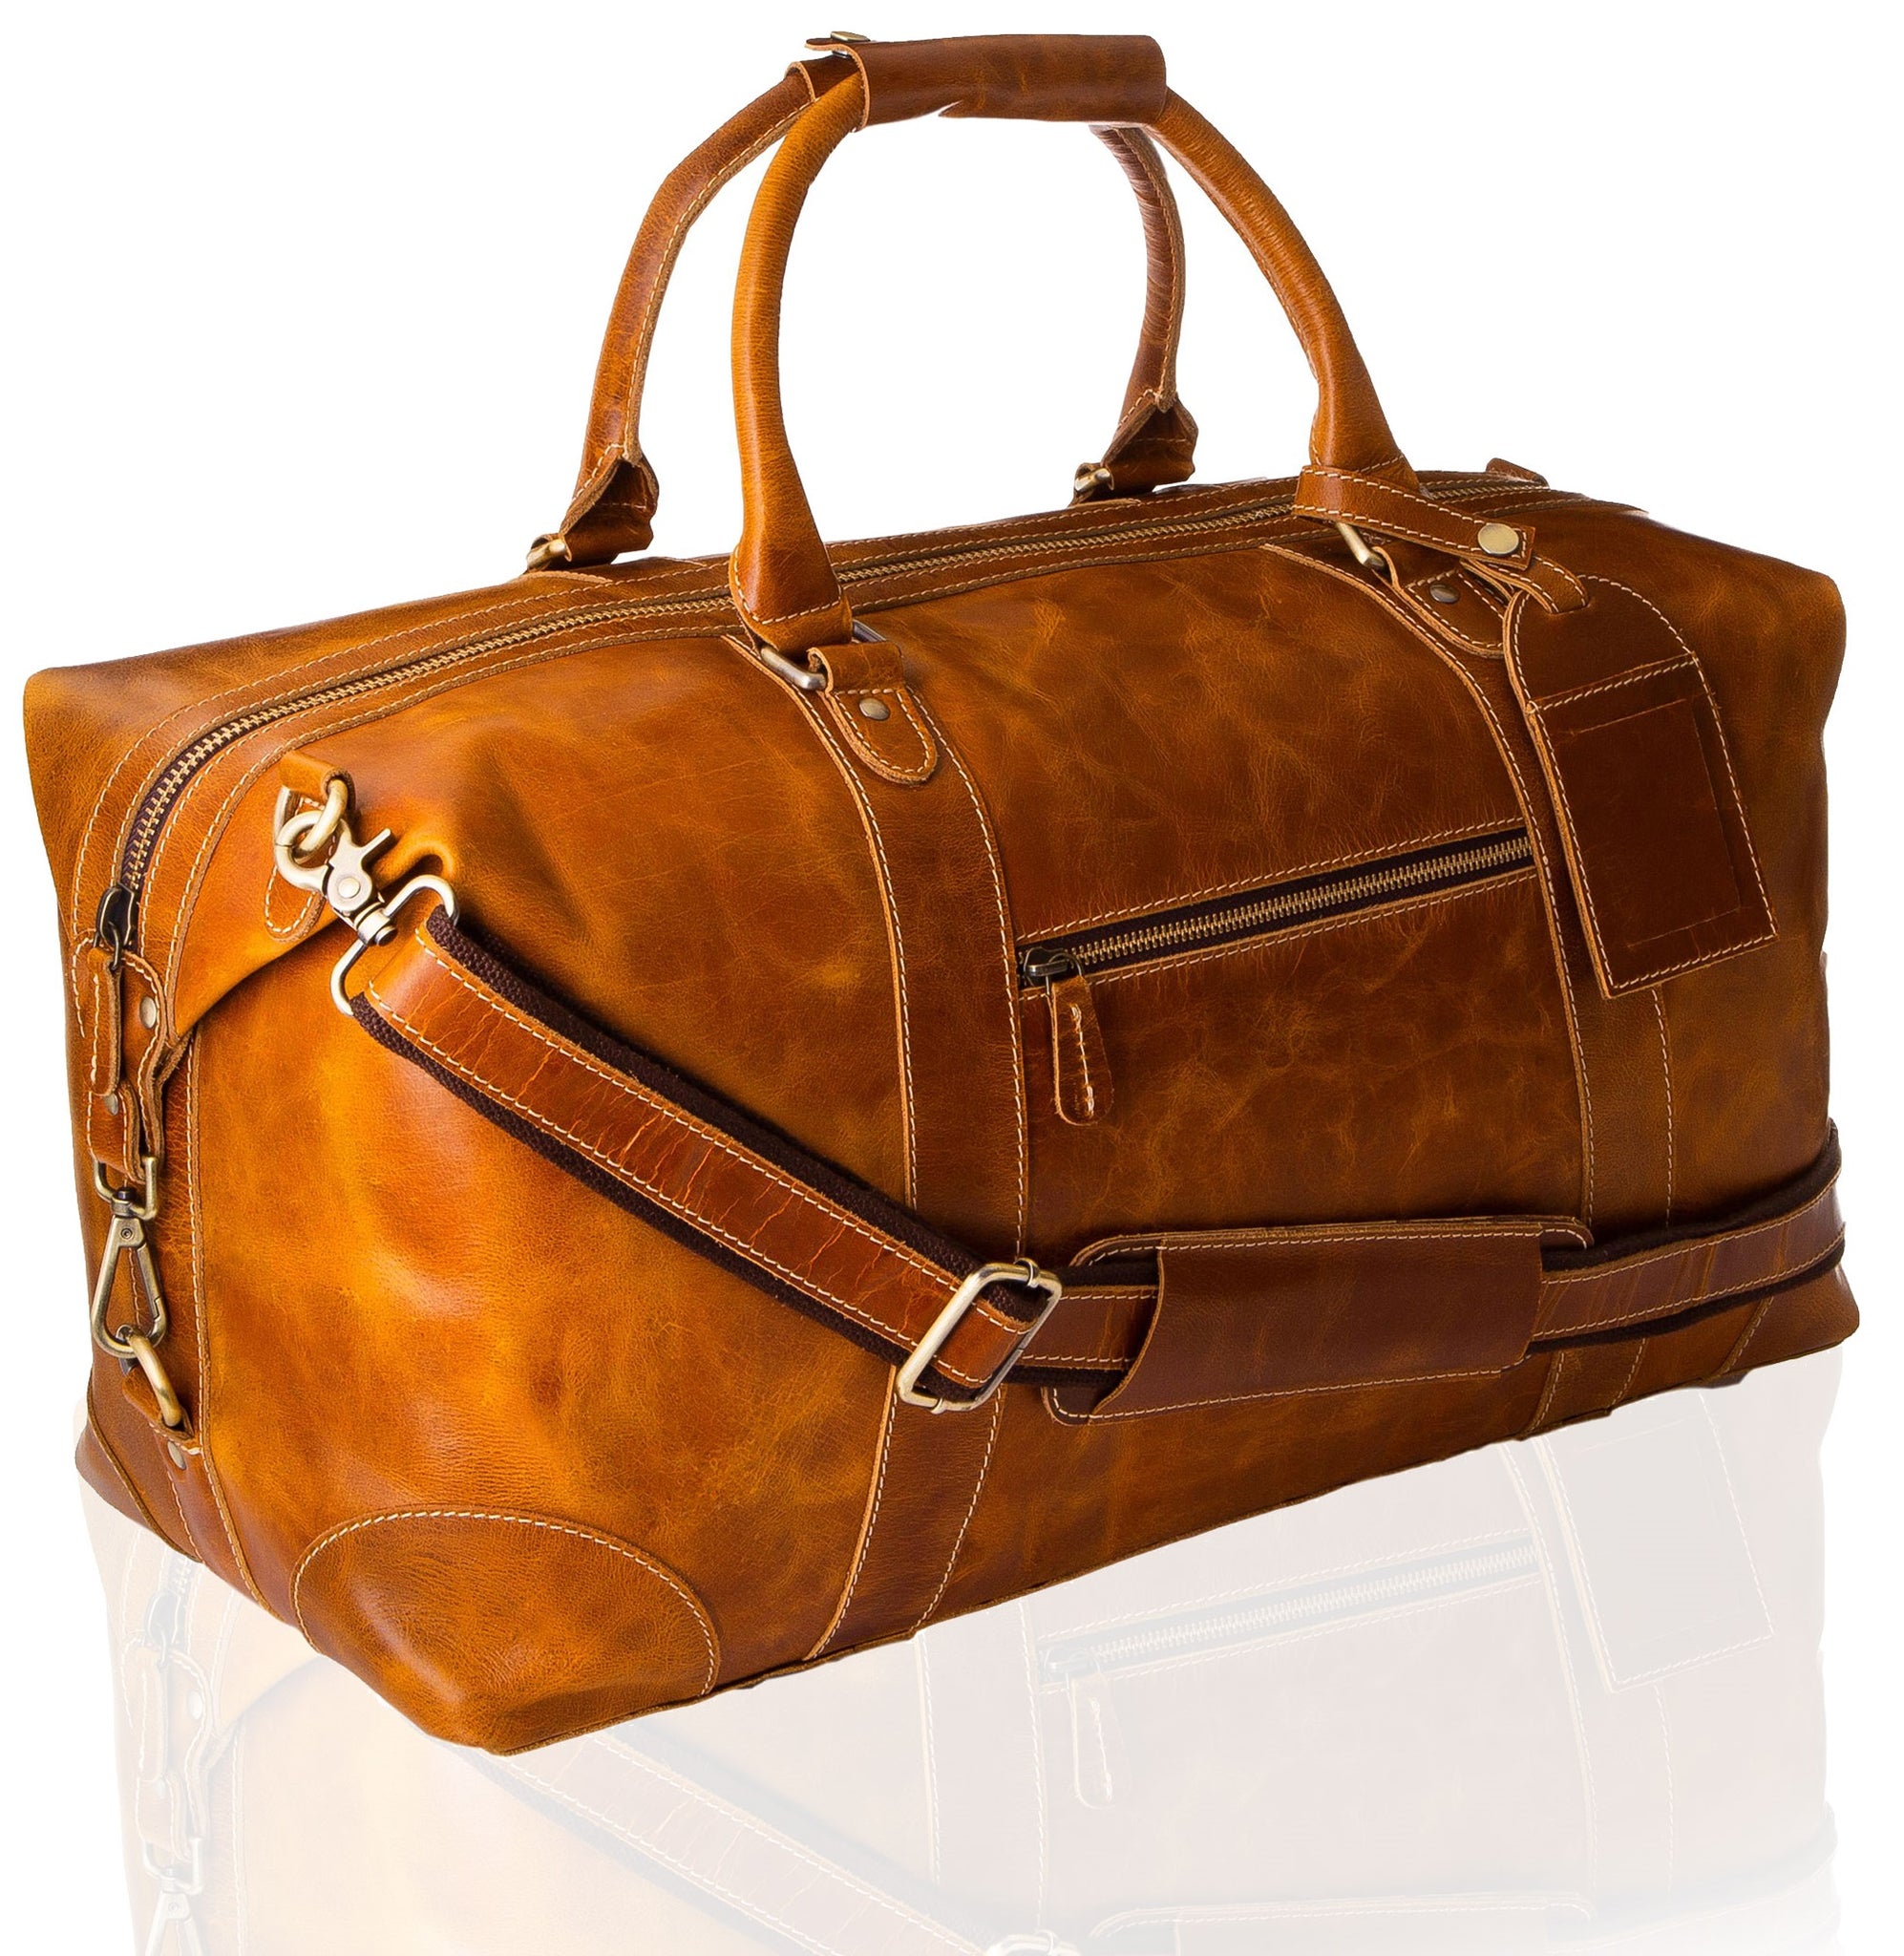 Cheap Leather Duffel Bag - High On Leather